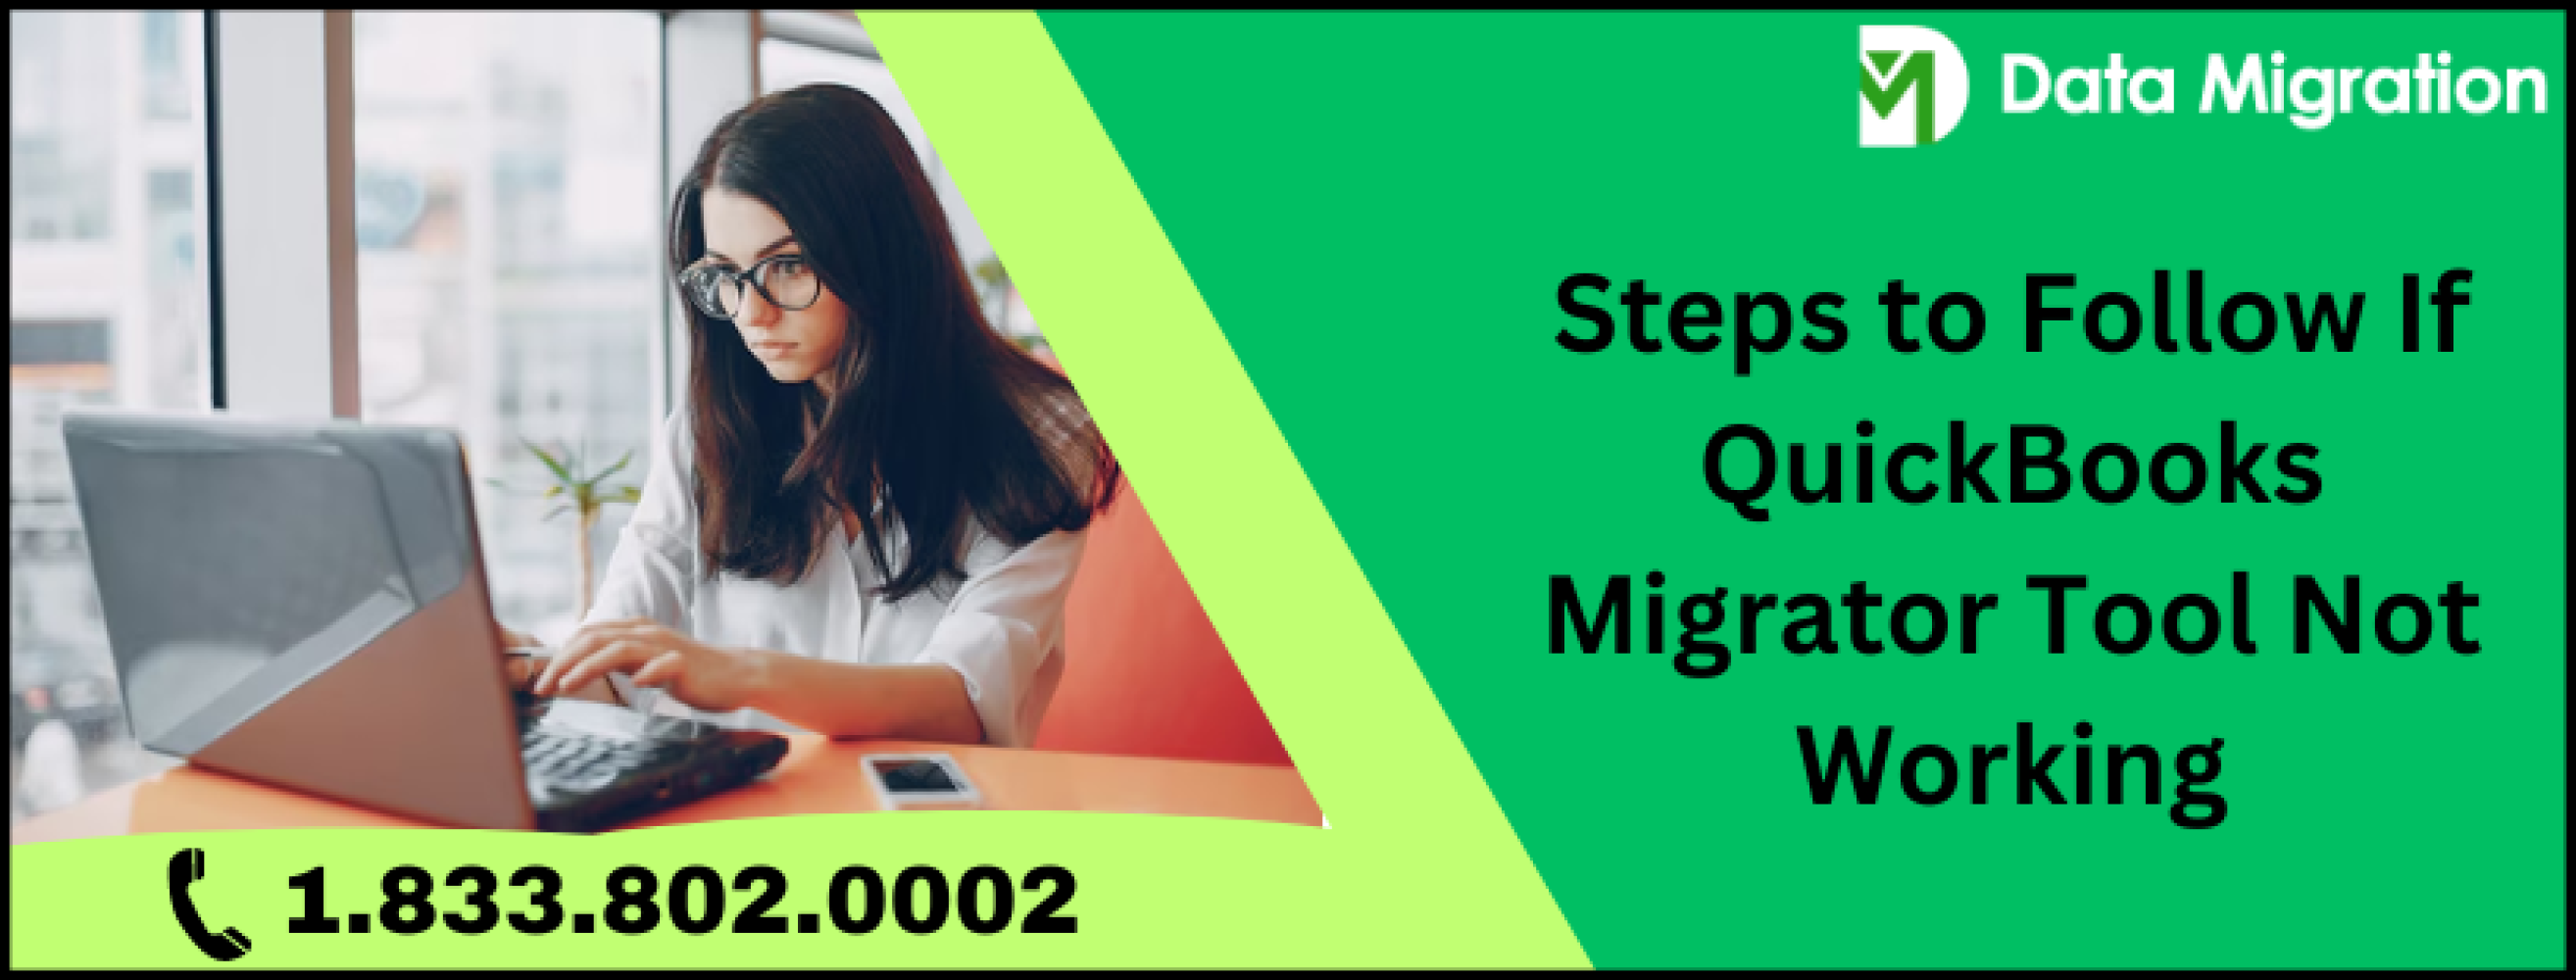 			Steps to Follow If QuickBooks Migrator Tool Not Working 
		- Community Stories ▷ learn and write about 3D printing	